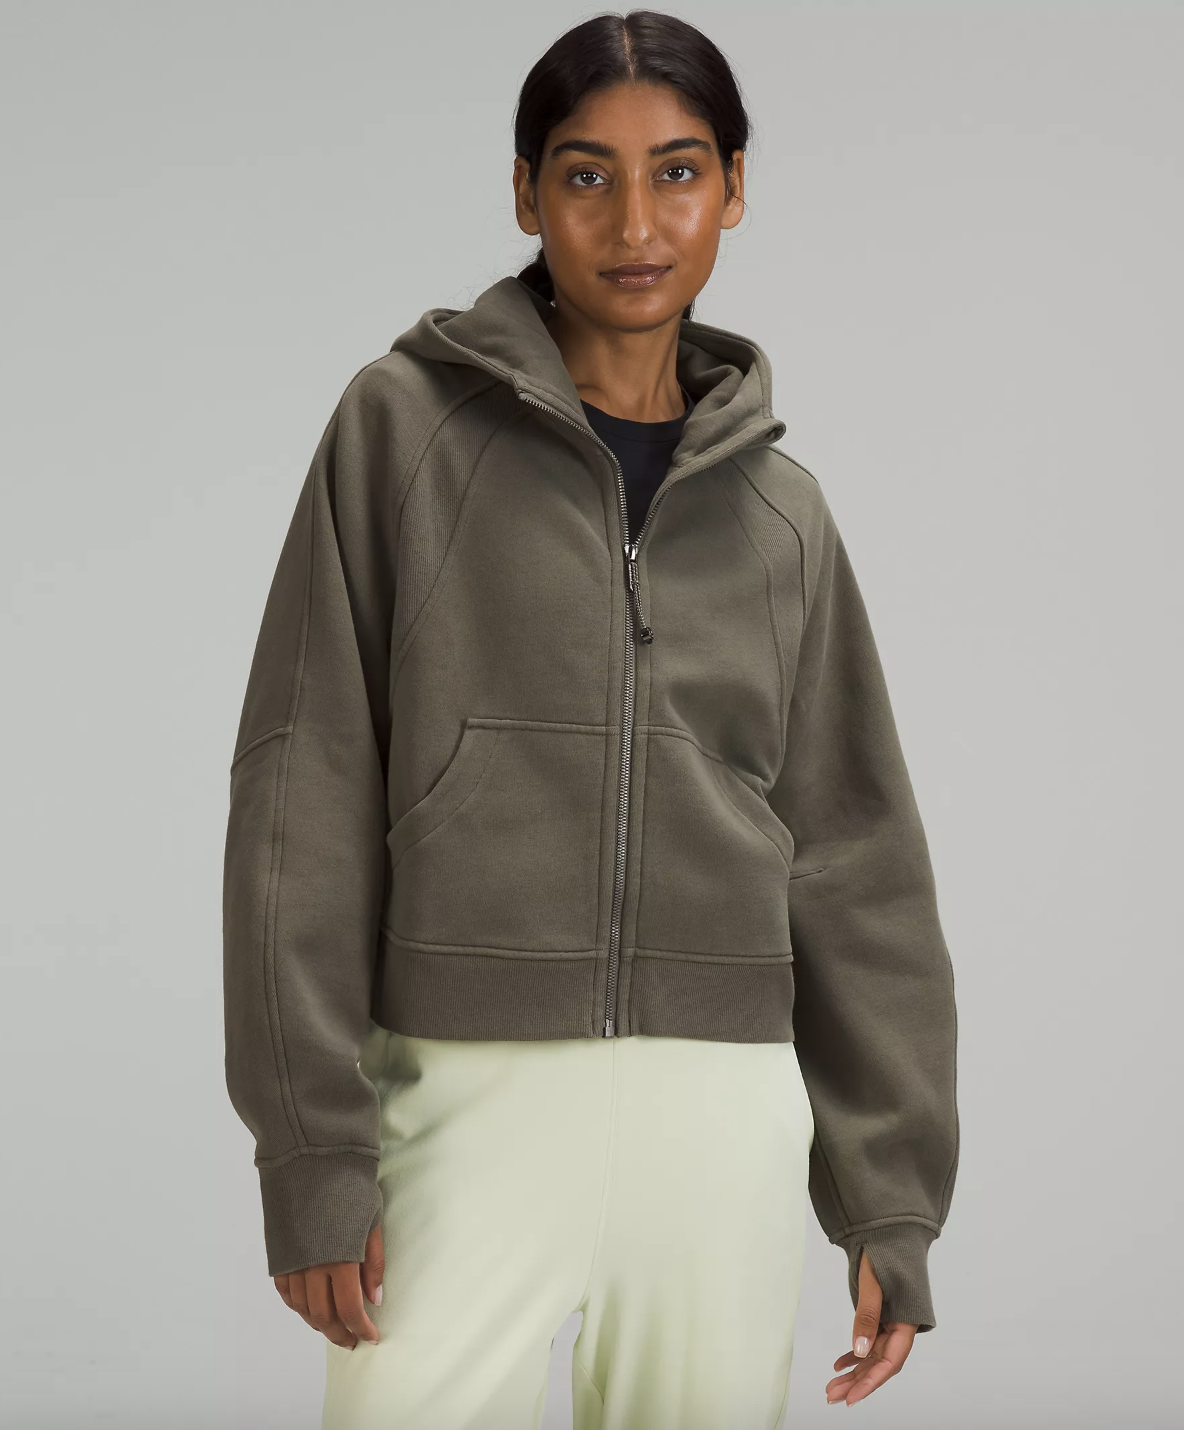 a person wearing the oversized fleece hoodie